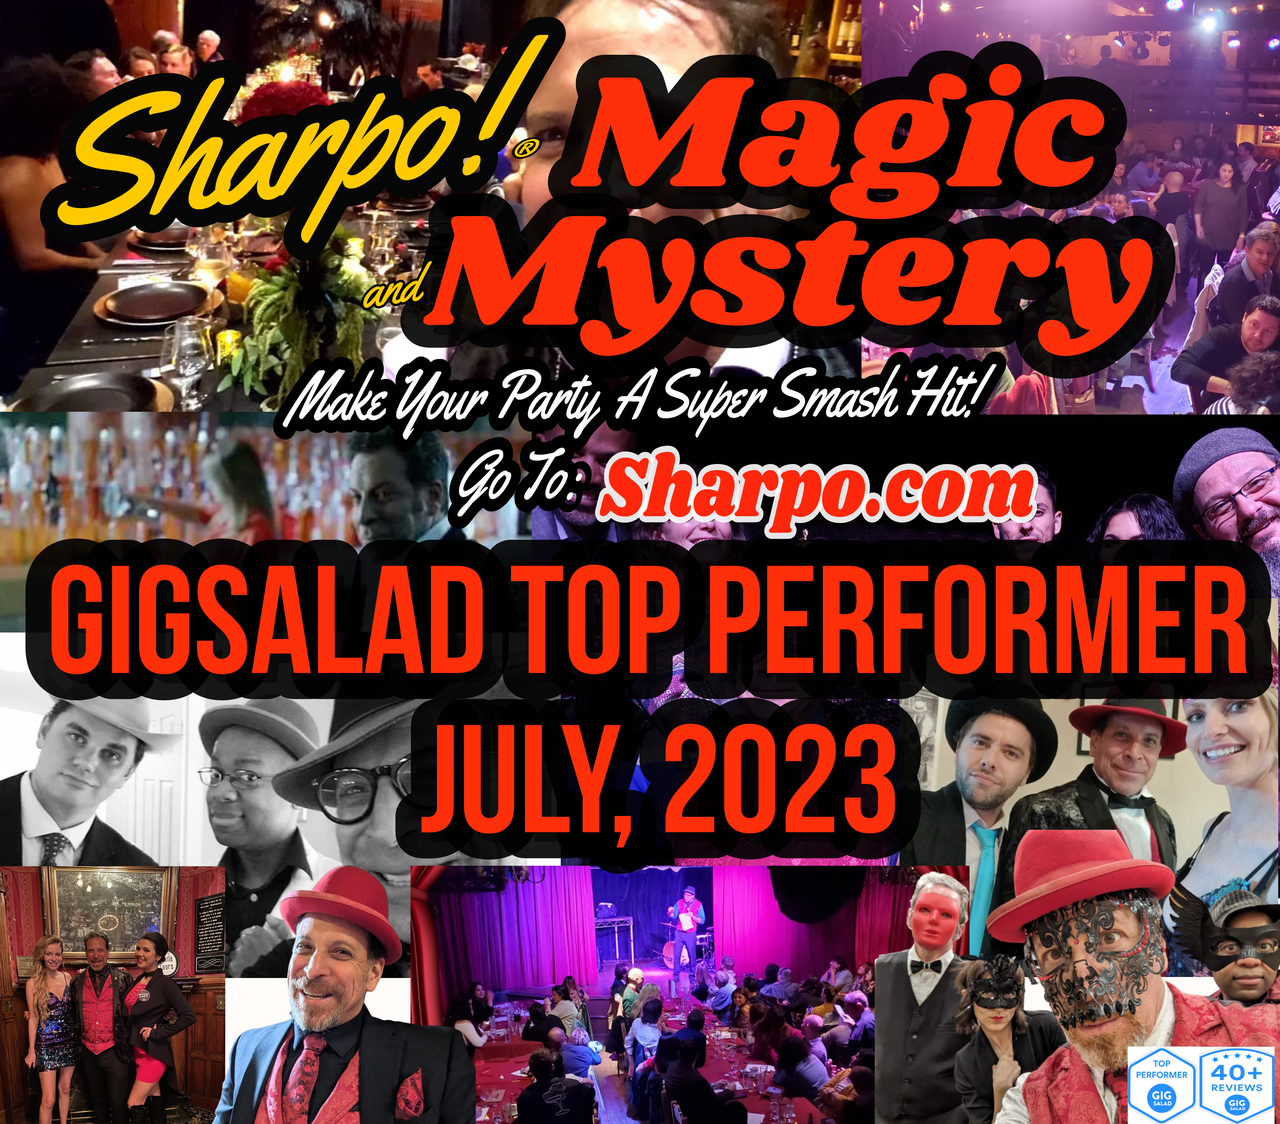 Sharpo is over the top again this month thanks to the wonderful audiences who have called us in for magic and mystery shows!  Los Angeles's best parties.